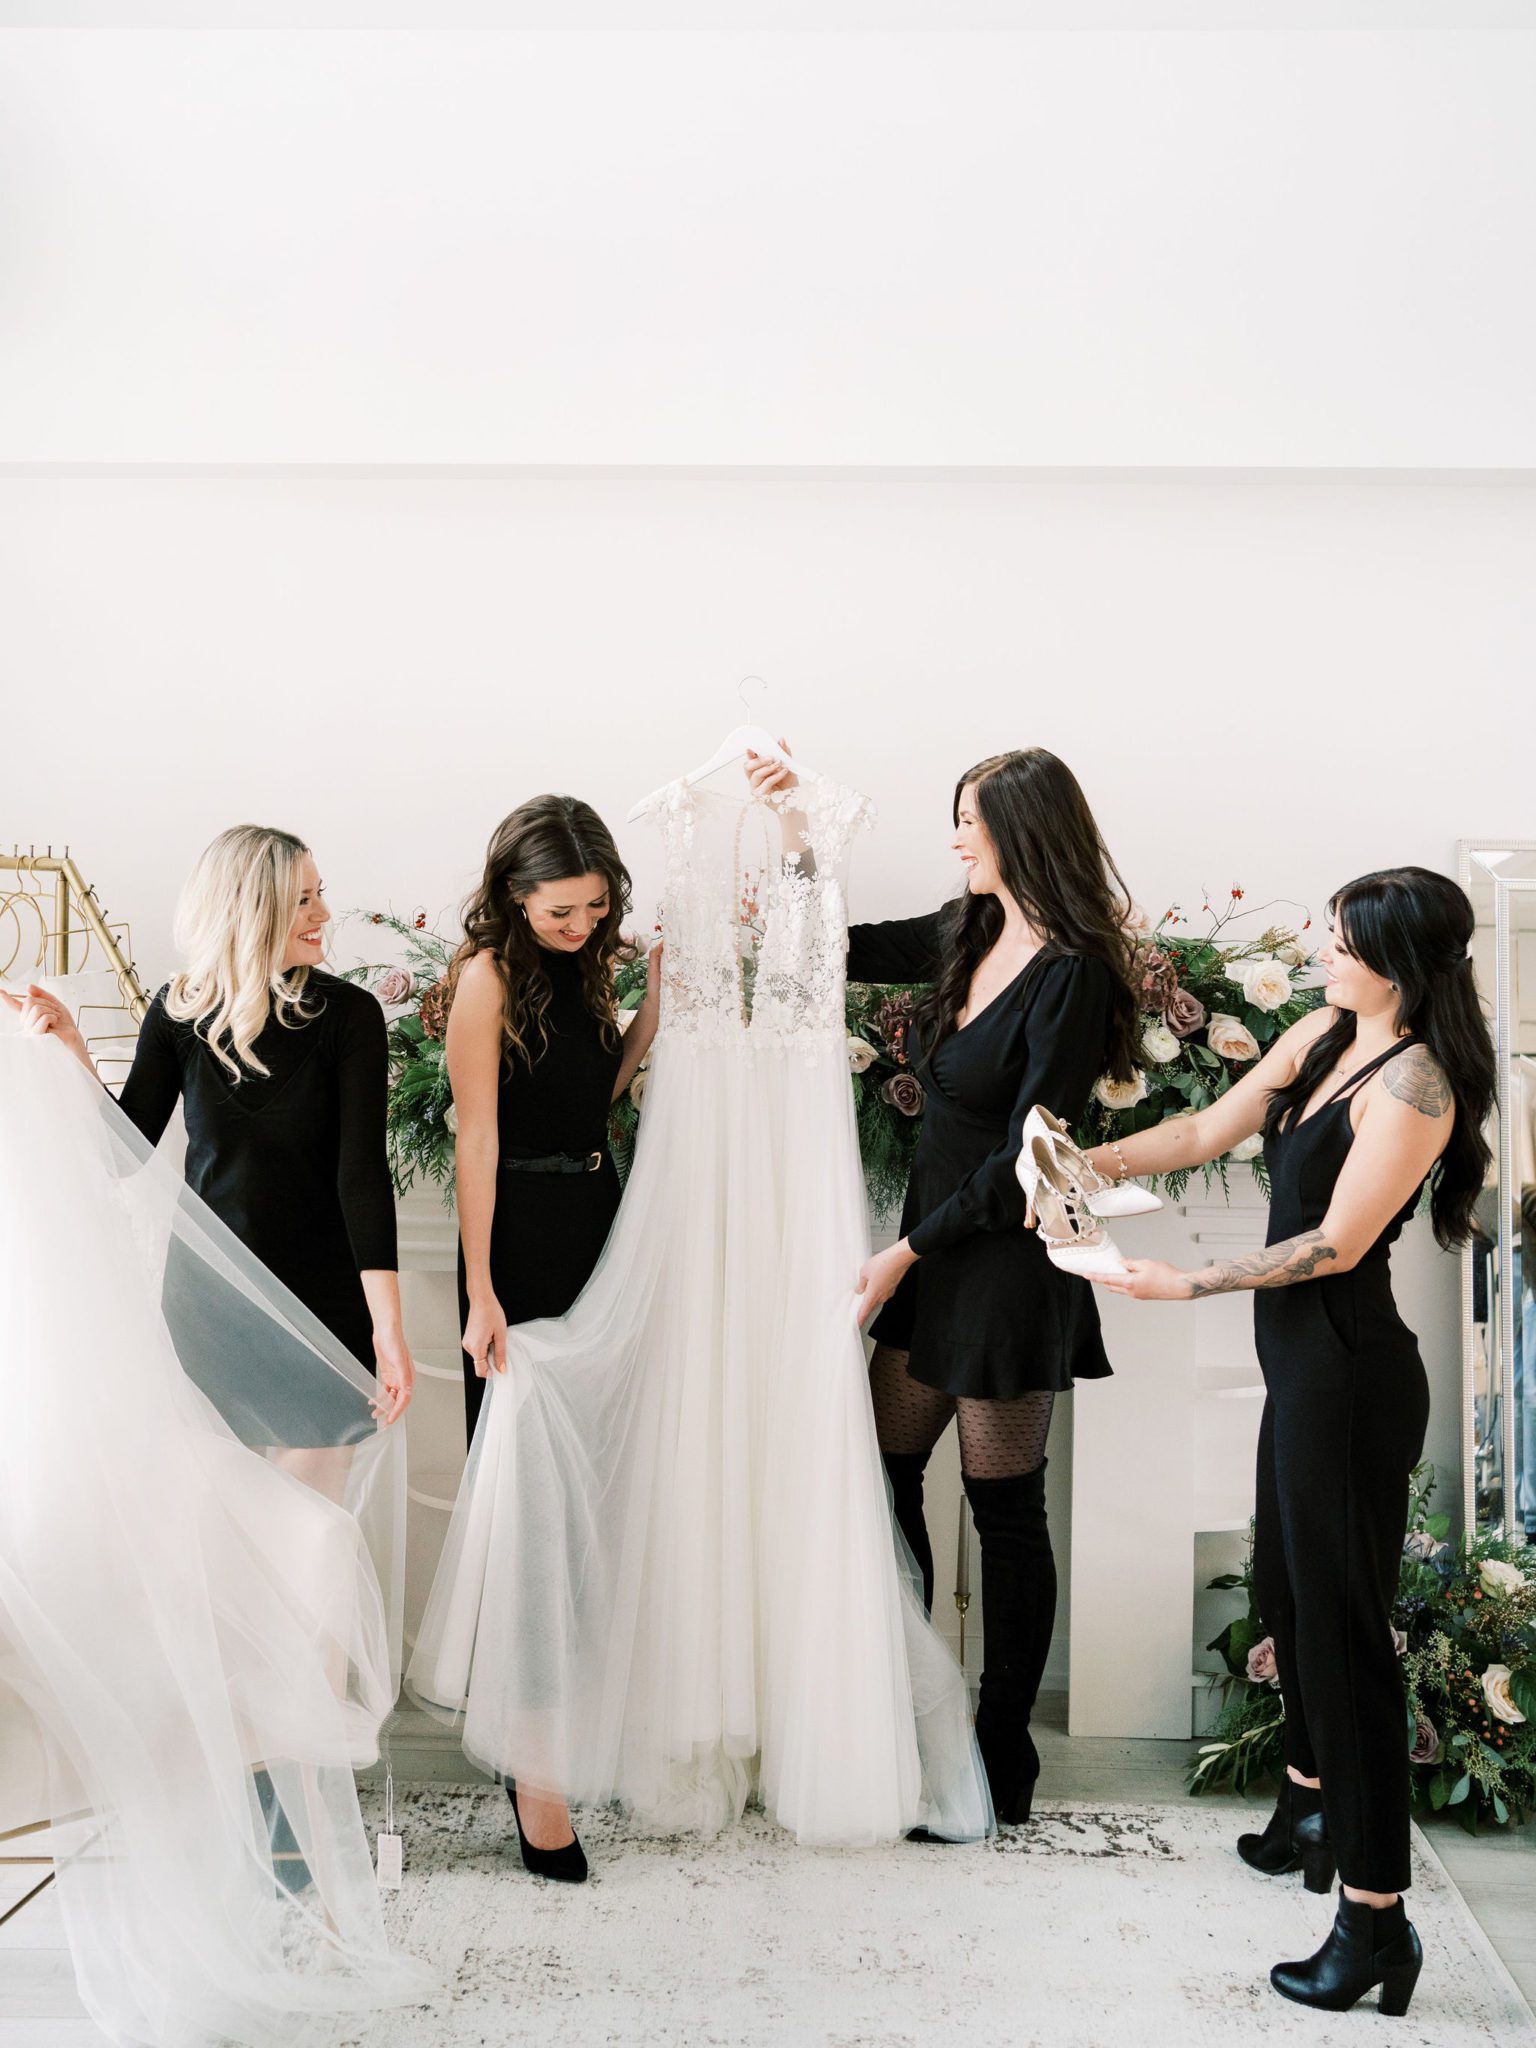 Blush and Raven Bridal Boutique: Wedding Dress Shopping Q and A